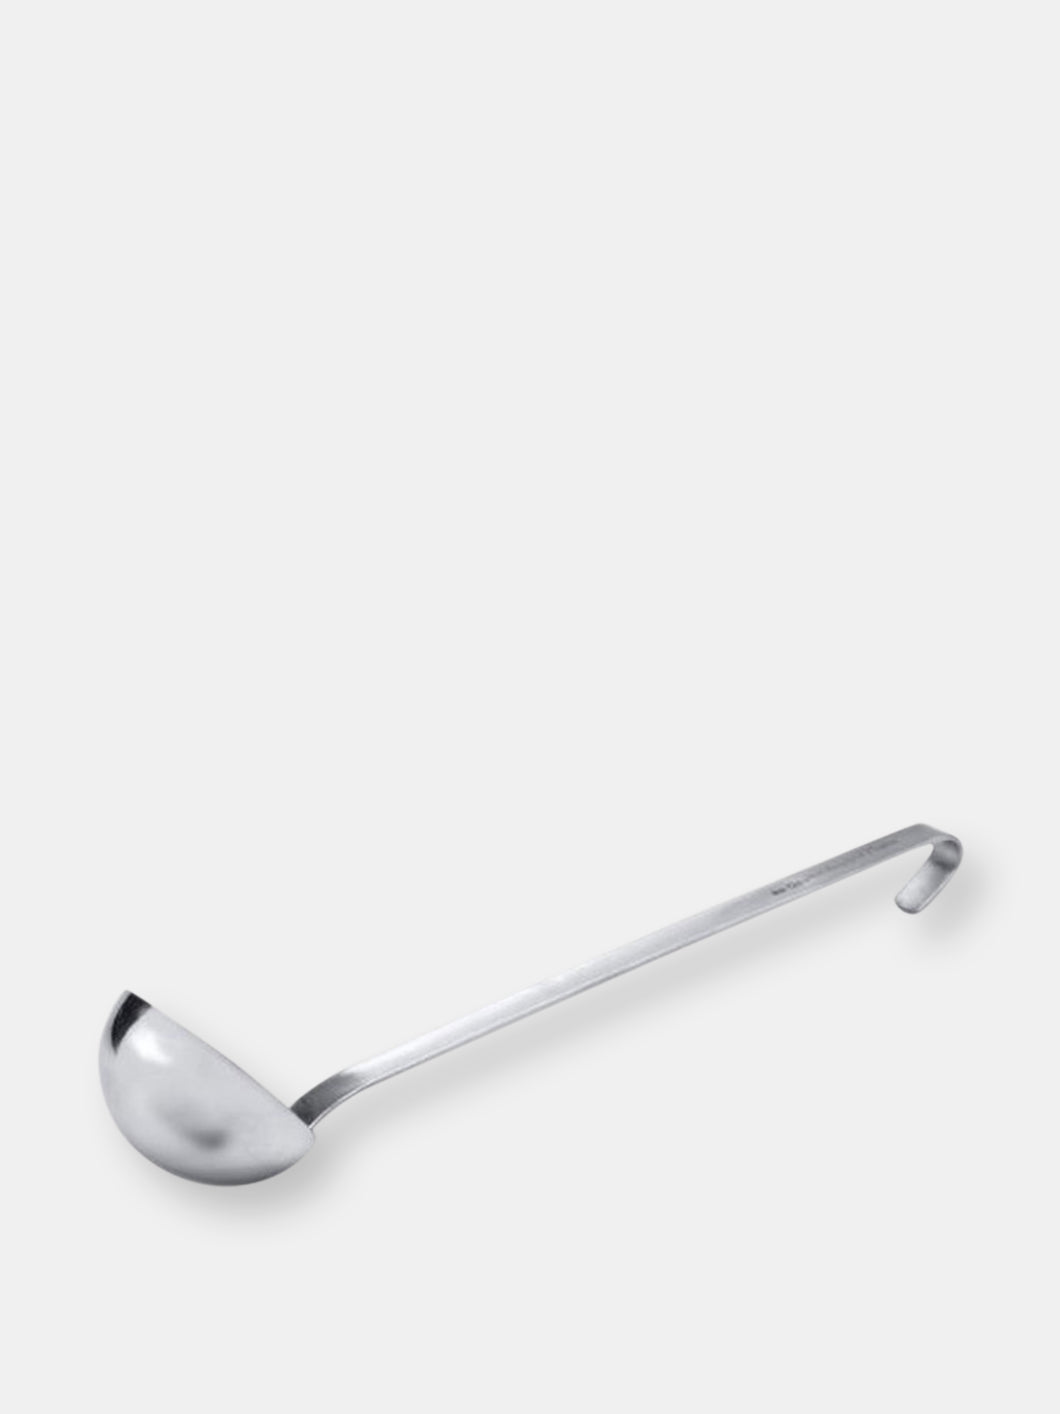 BergHOFF 17oz Stainless Steel Soup Ladle